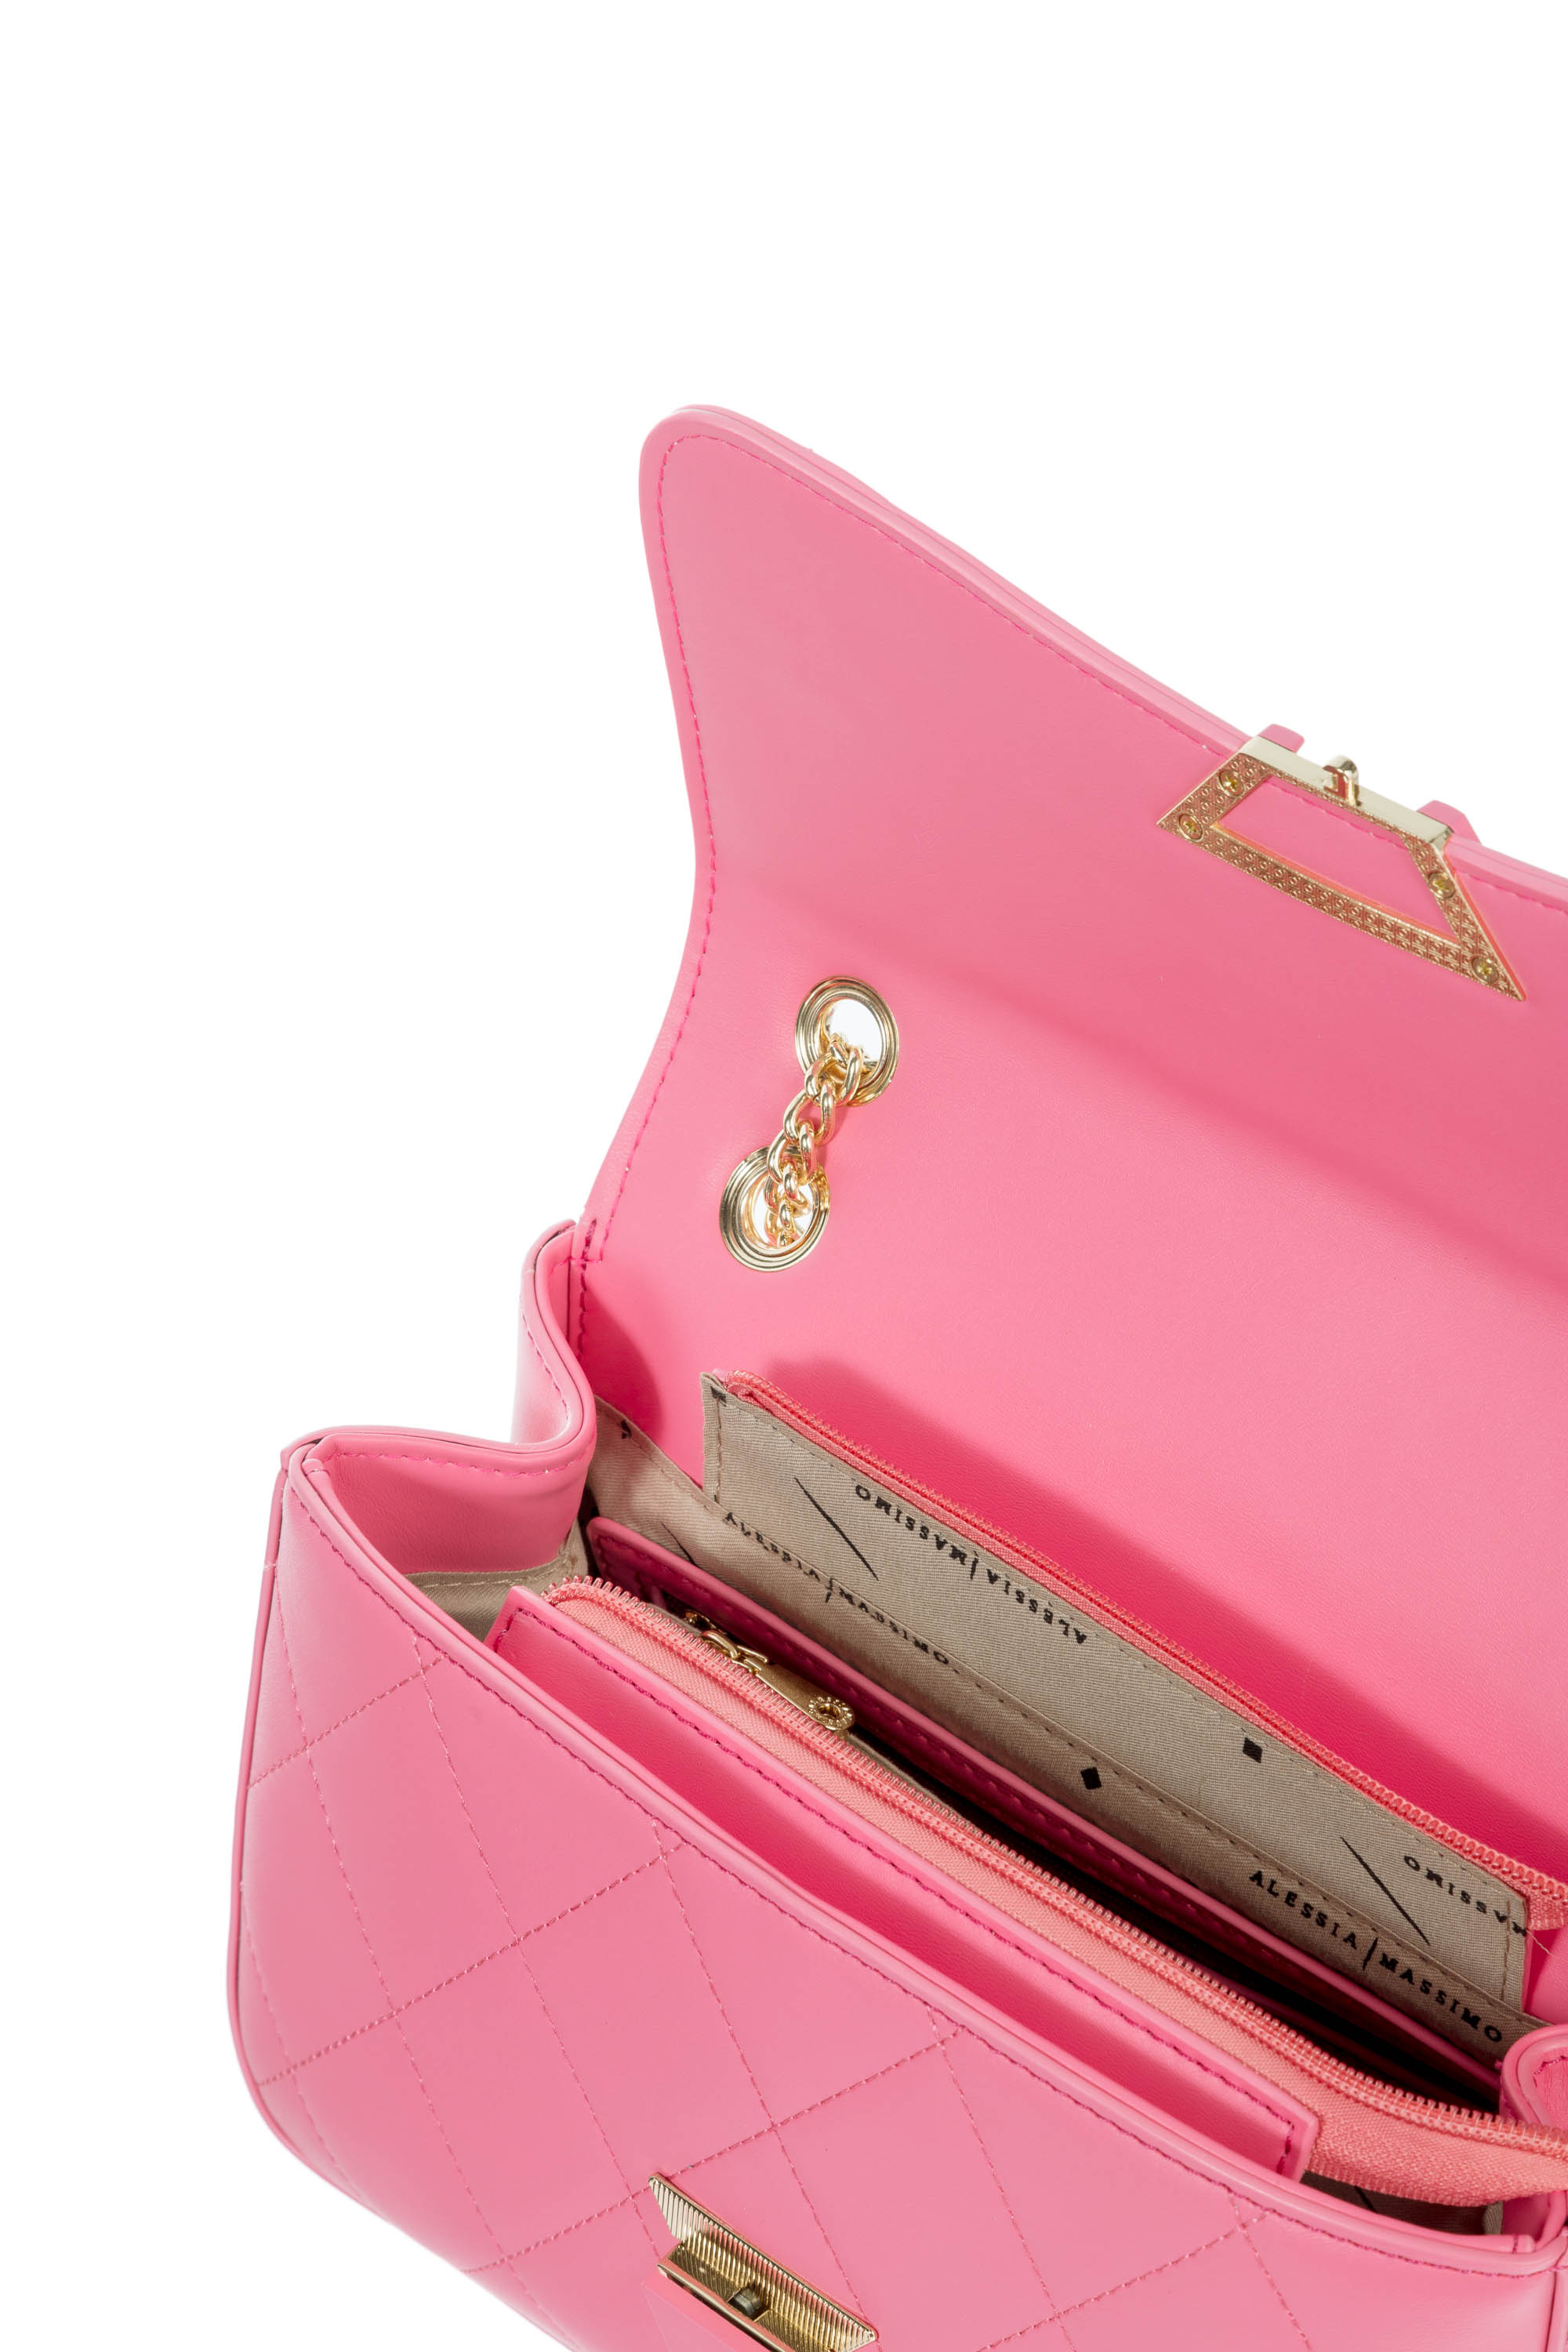 BAG PINK - STYLE1700